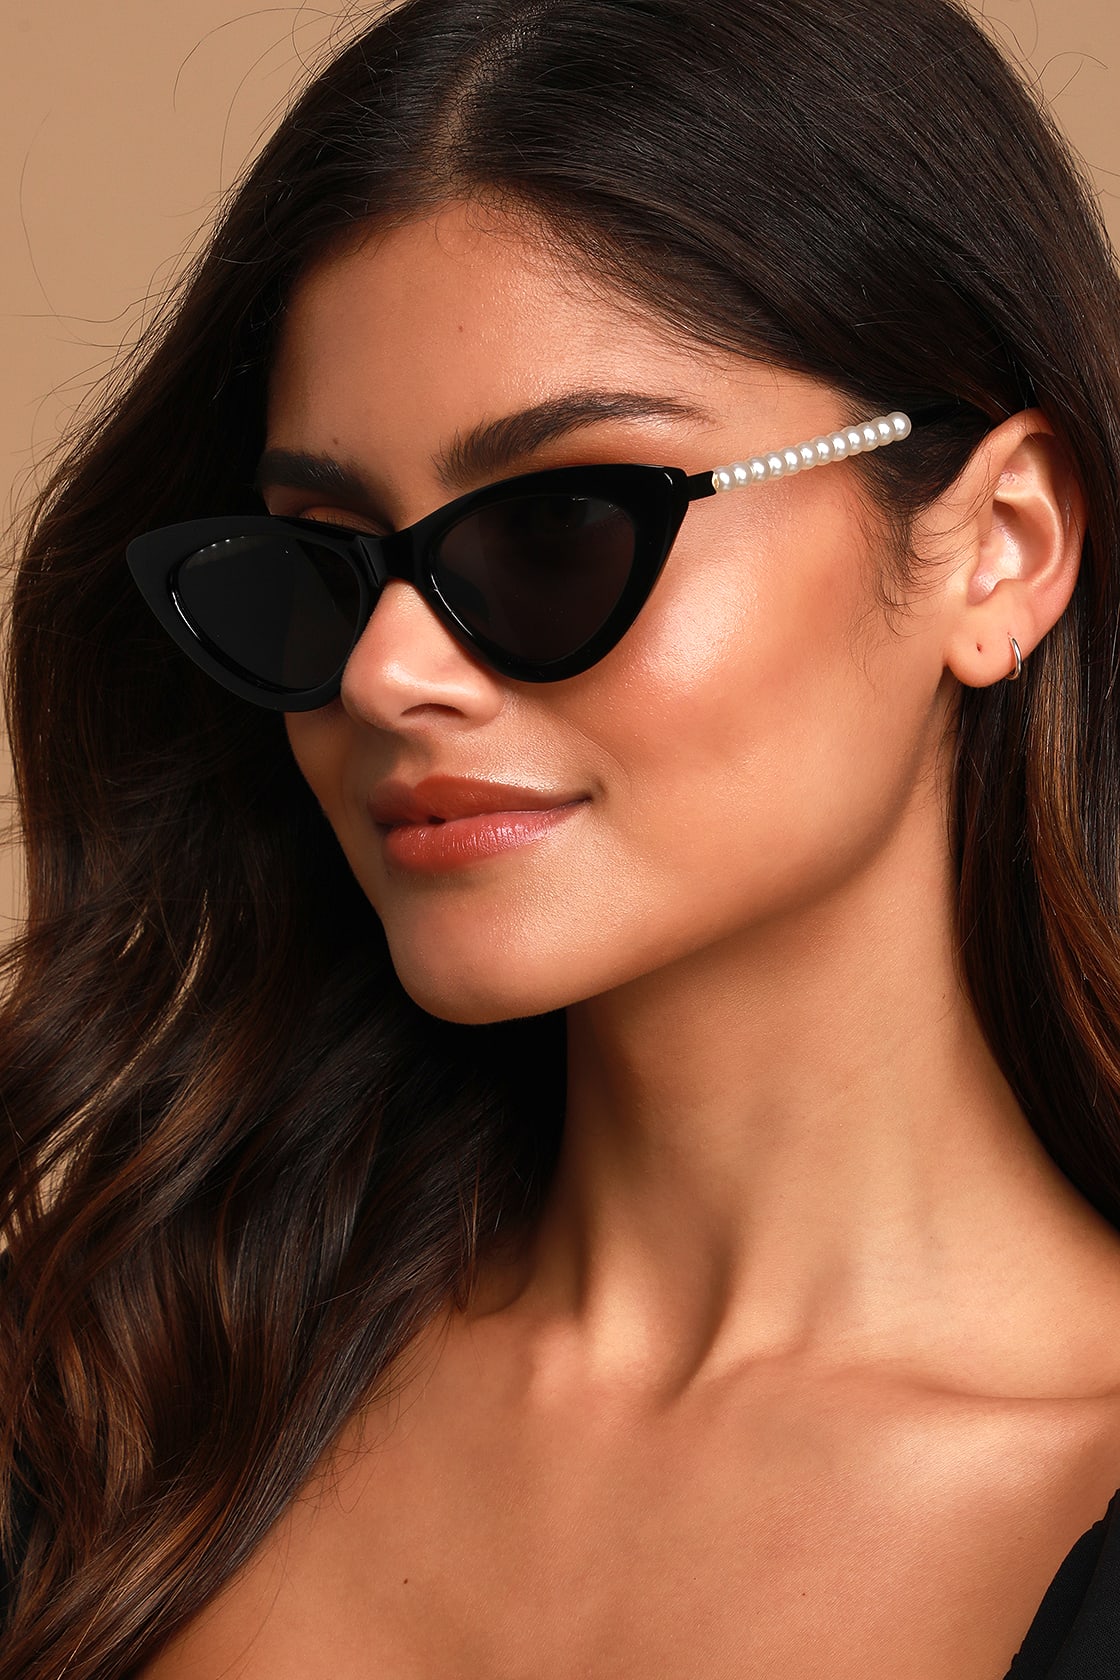 These chic cat-eye sunglasses with tinted black lenses and elegant black frames.